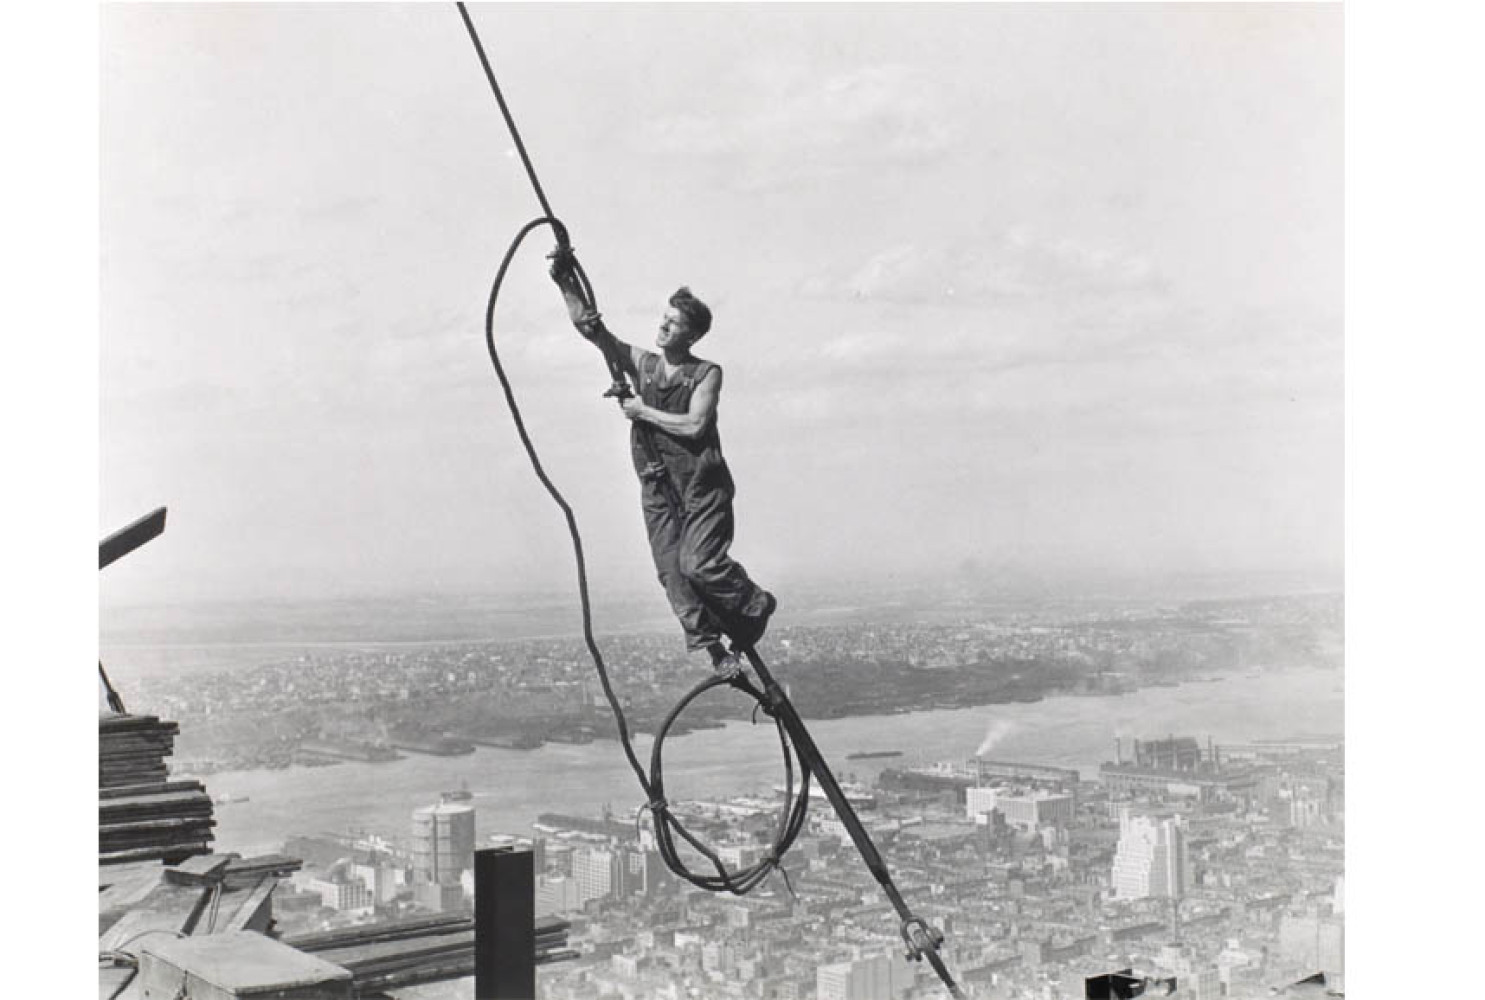 Icarus, 1931, By Lewis W. Hine (American, 1874—1940); Gelatin silver print; Gift of Mr. Robert W. Marks; 1974.012.0037
